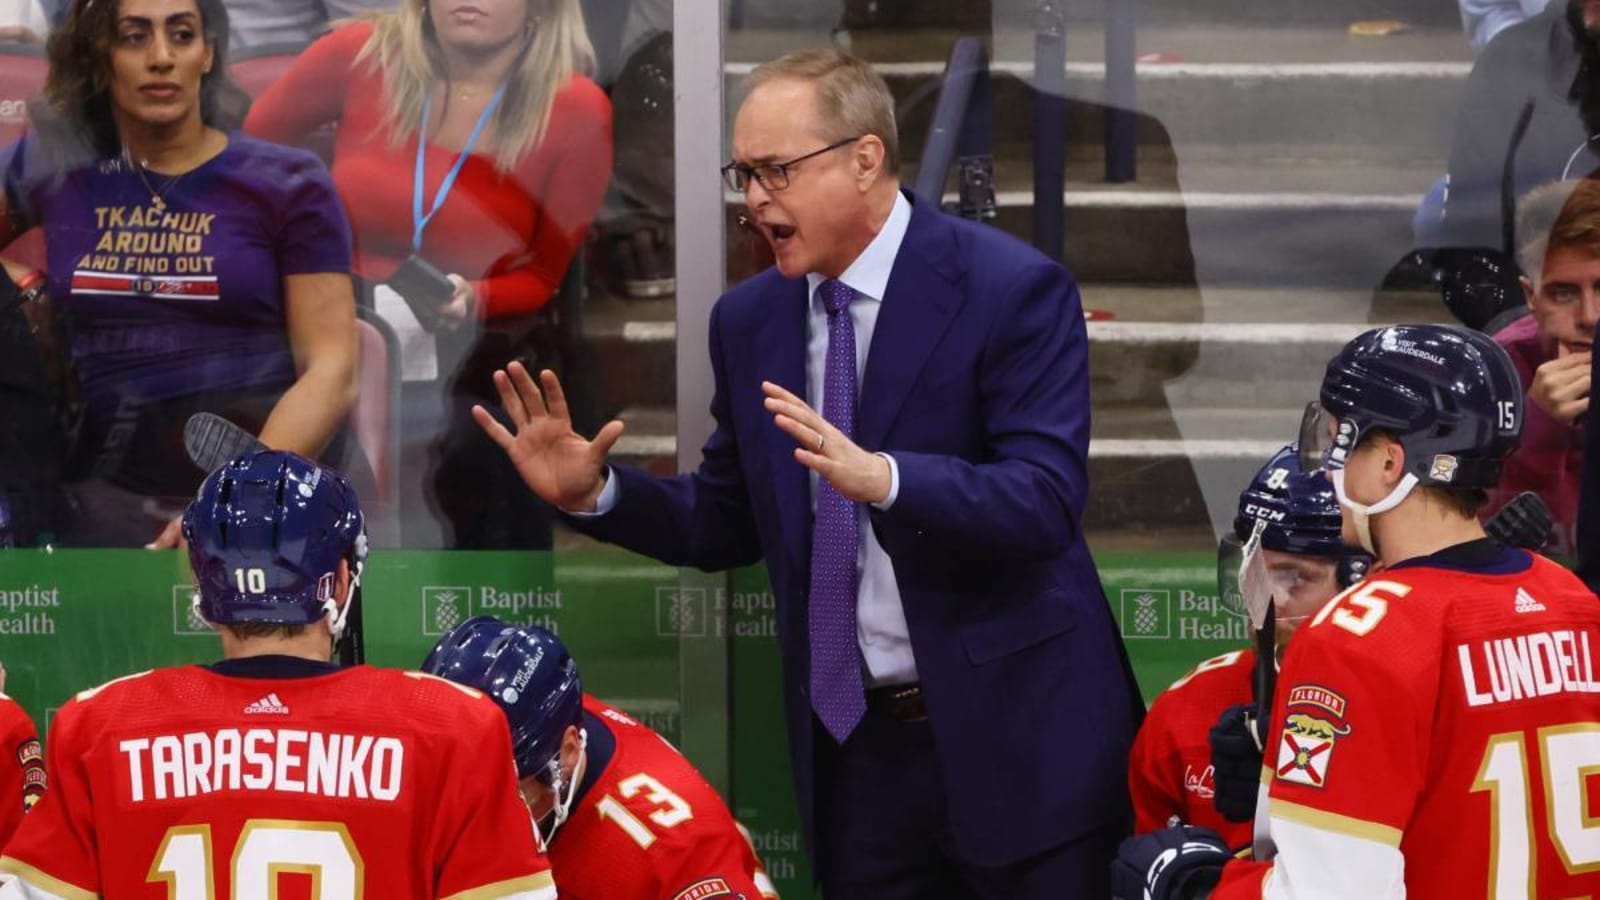 'They needed some profanity': Panthers’ Maurice says Game 5 tirade was necessary